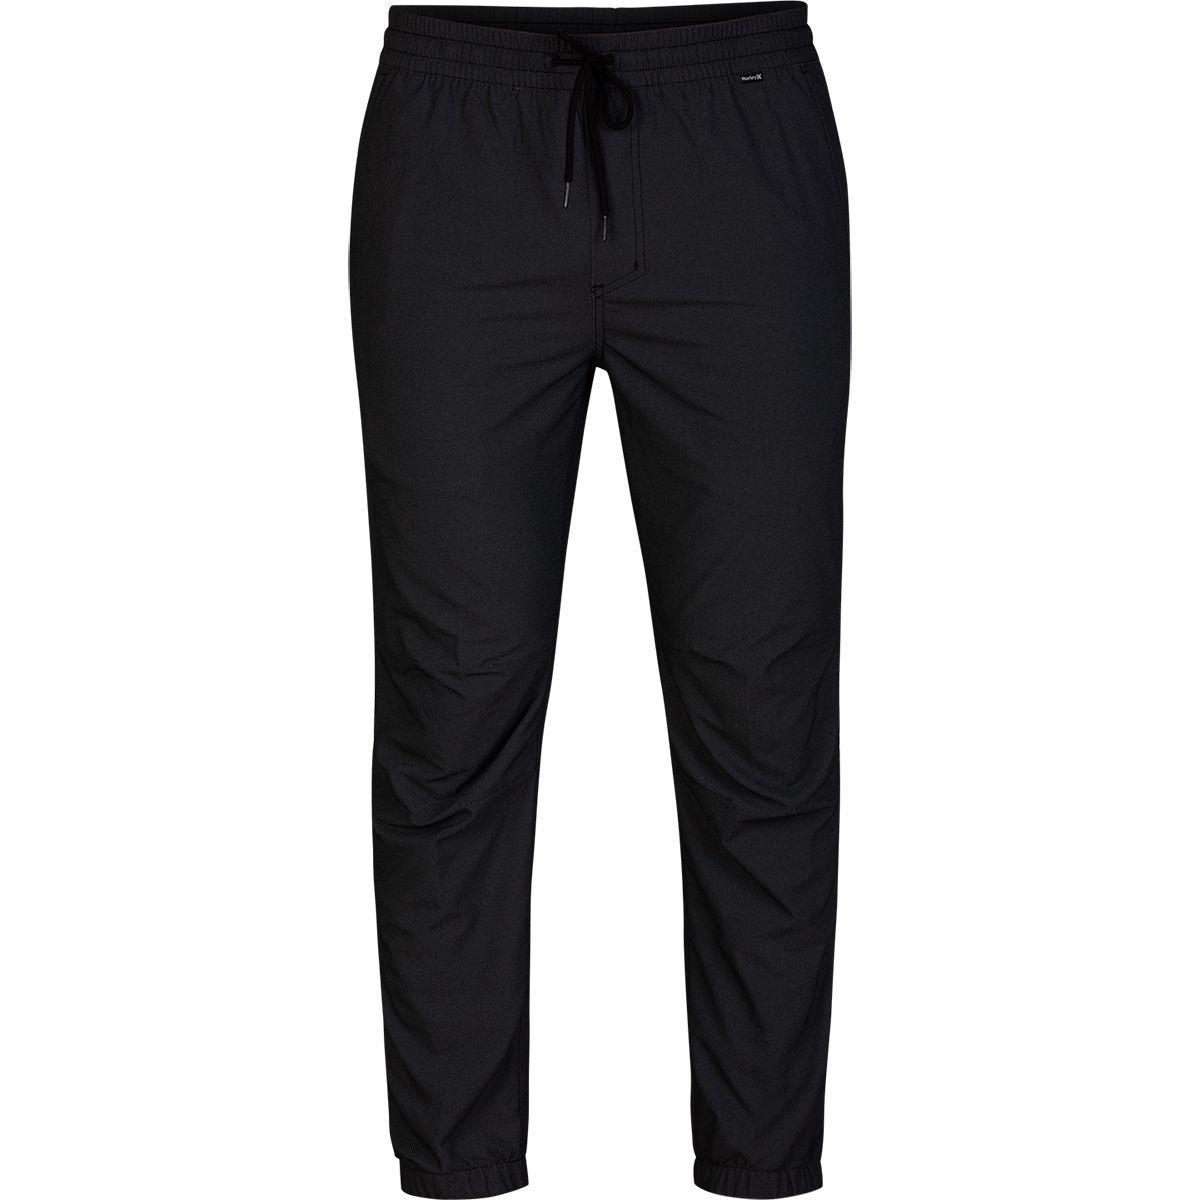 Hurley Synthetic Dri-fit Jogger Pant in Black for Men - Save 2% - Lyst